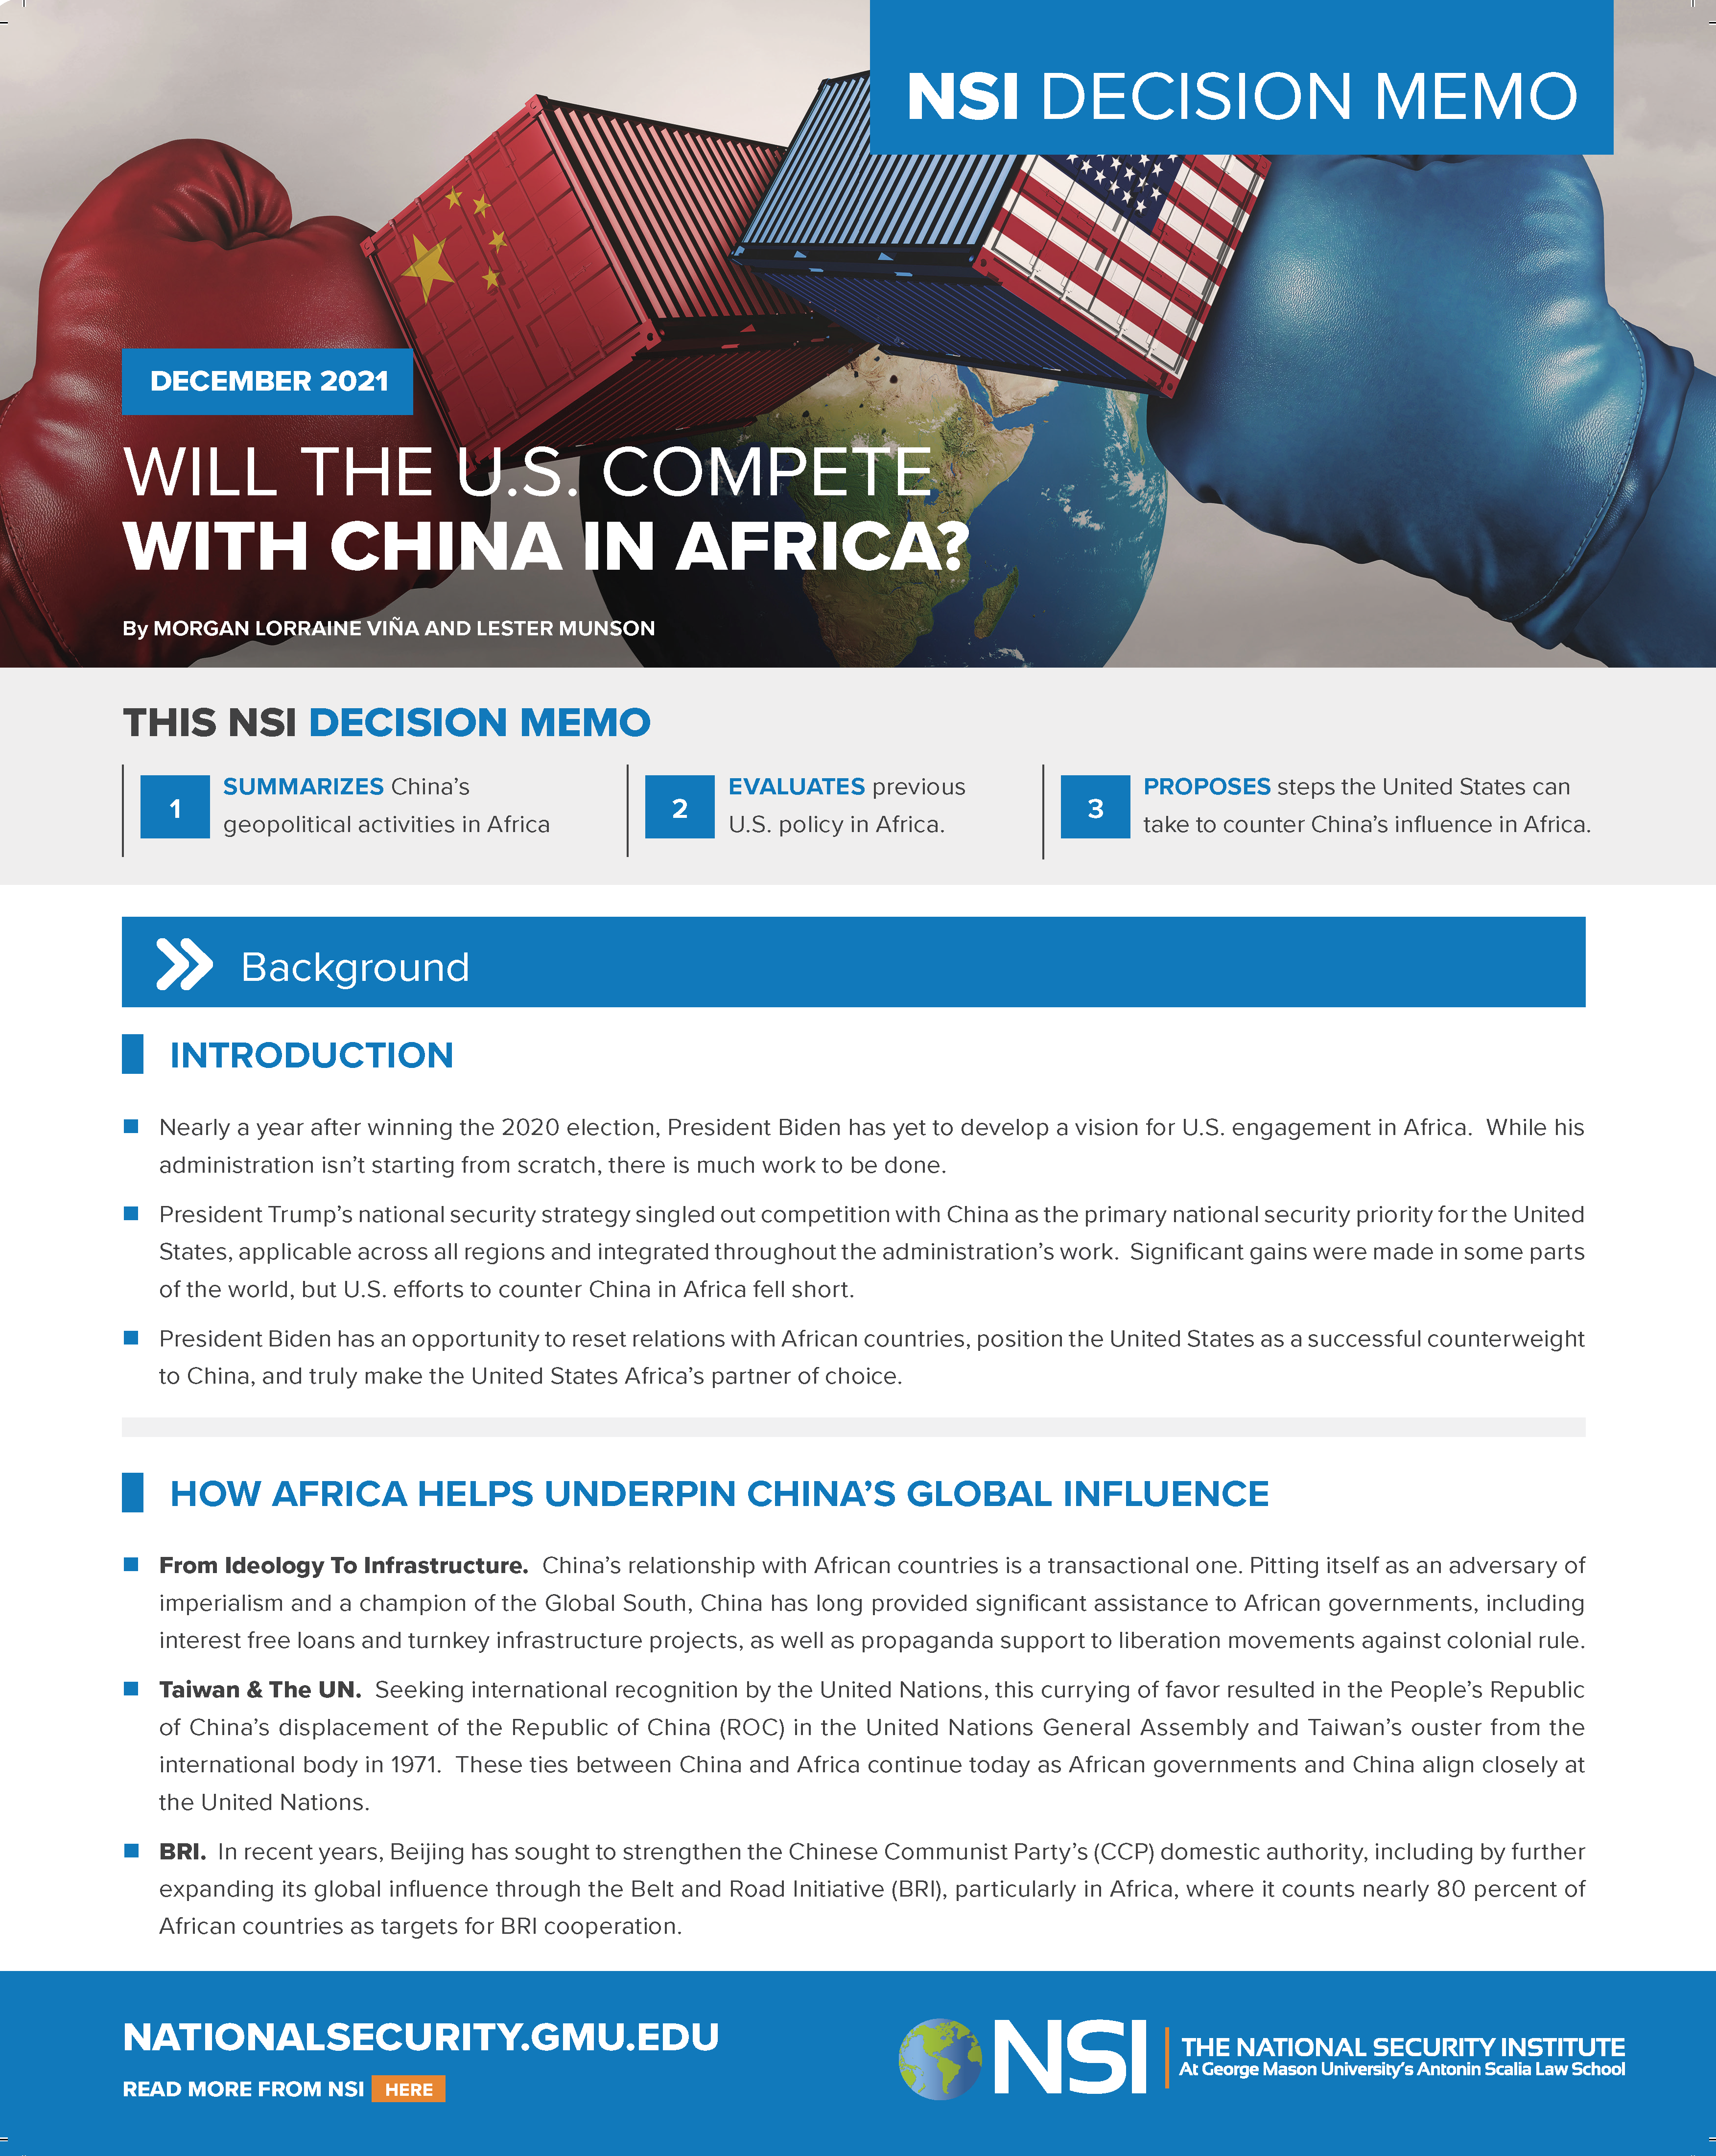 Will the U.S. Compete with China in Africa?